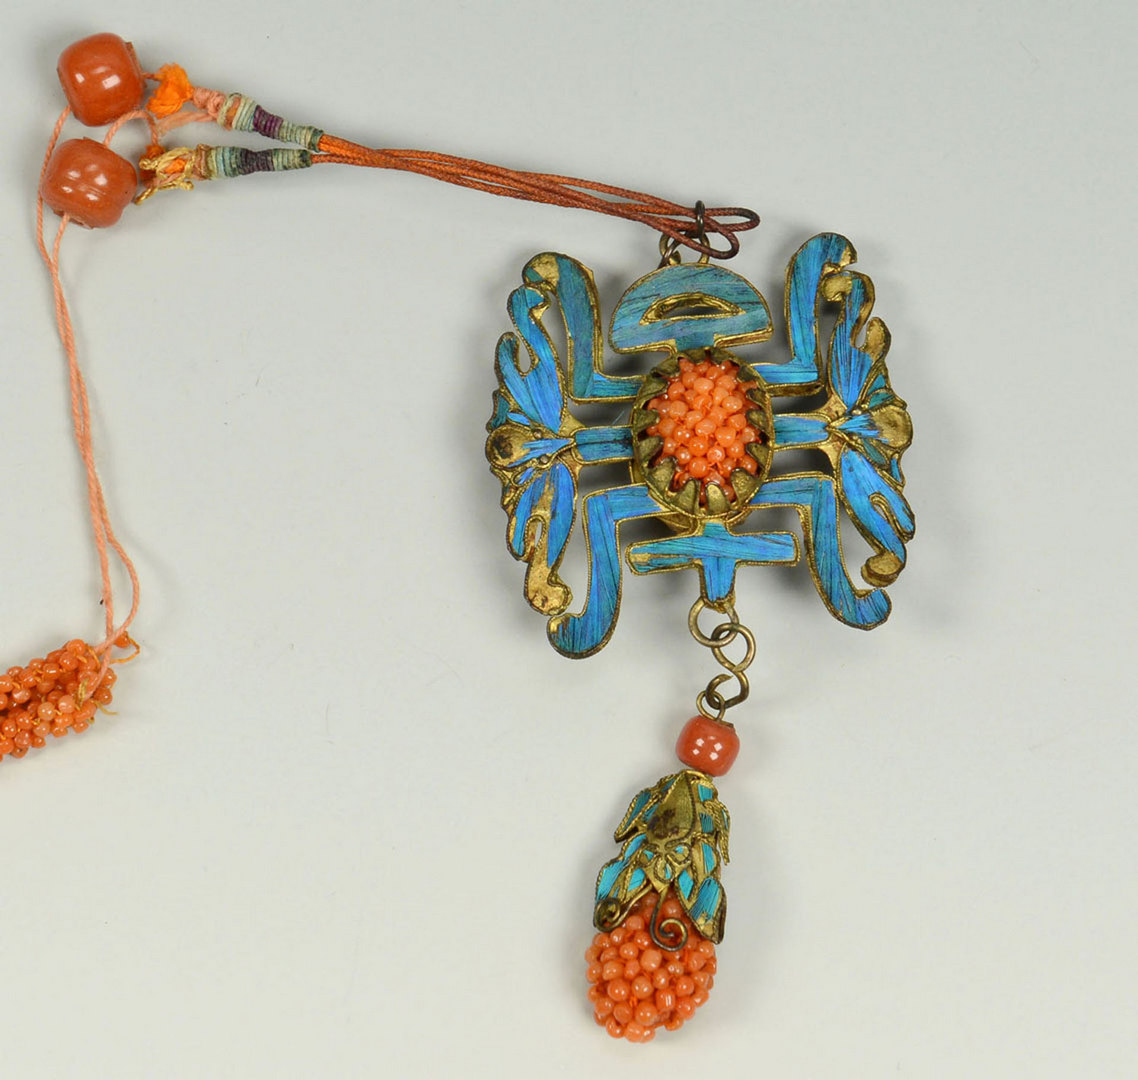 Lot 2: 3 Chinese Kingfisher Ornaments